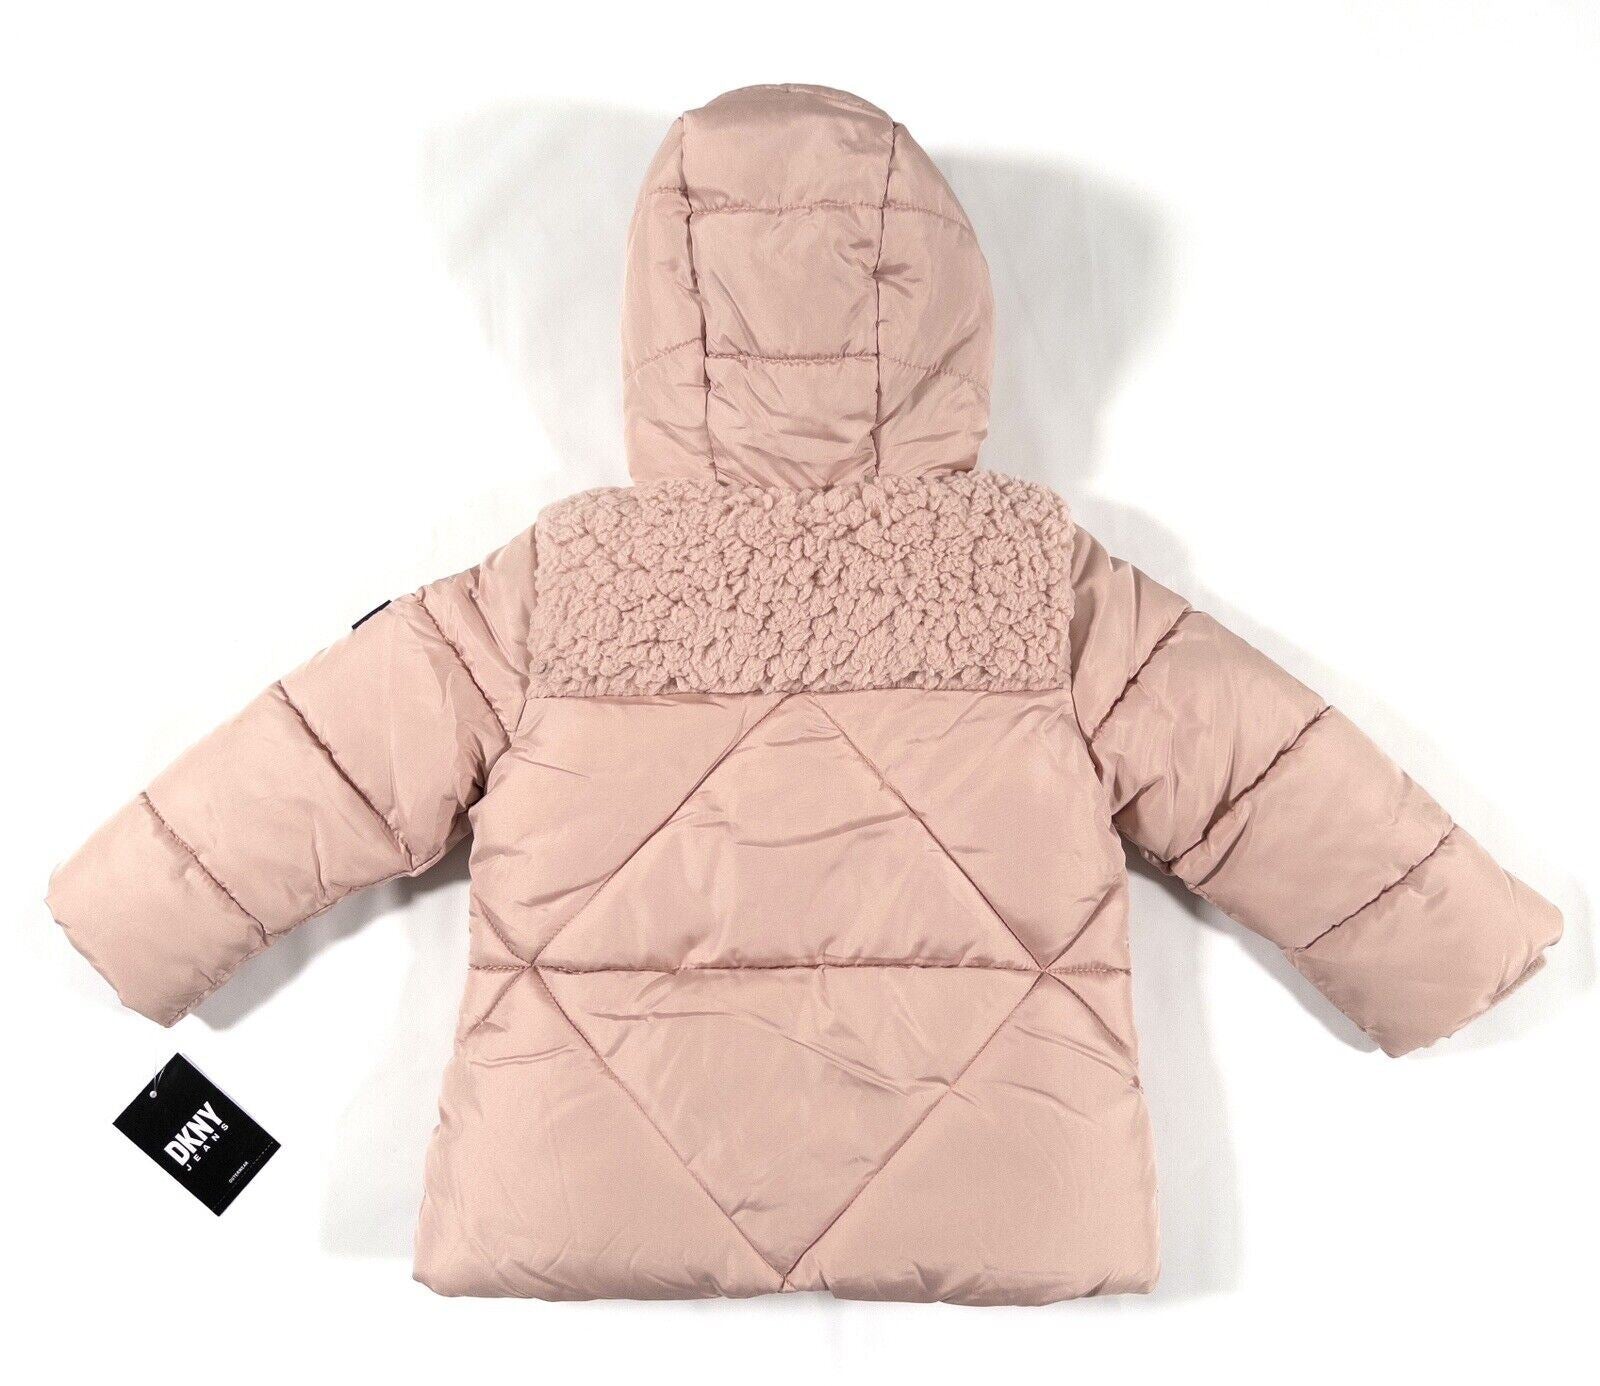 DKNY JEANS Baby Girl Pink Hooded Coat Size UK 12 Months